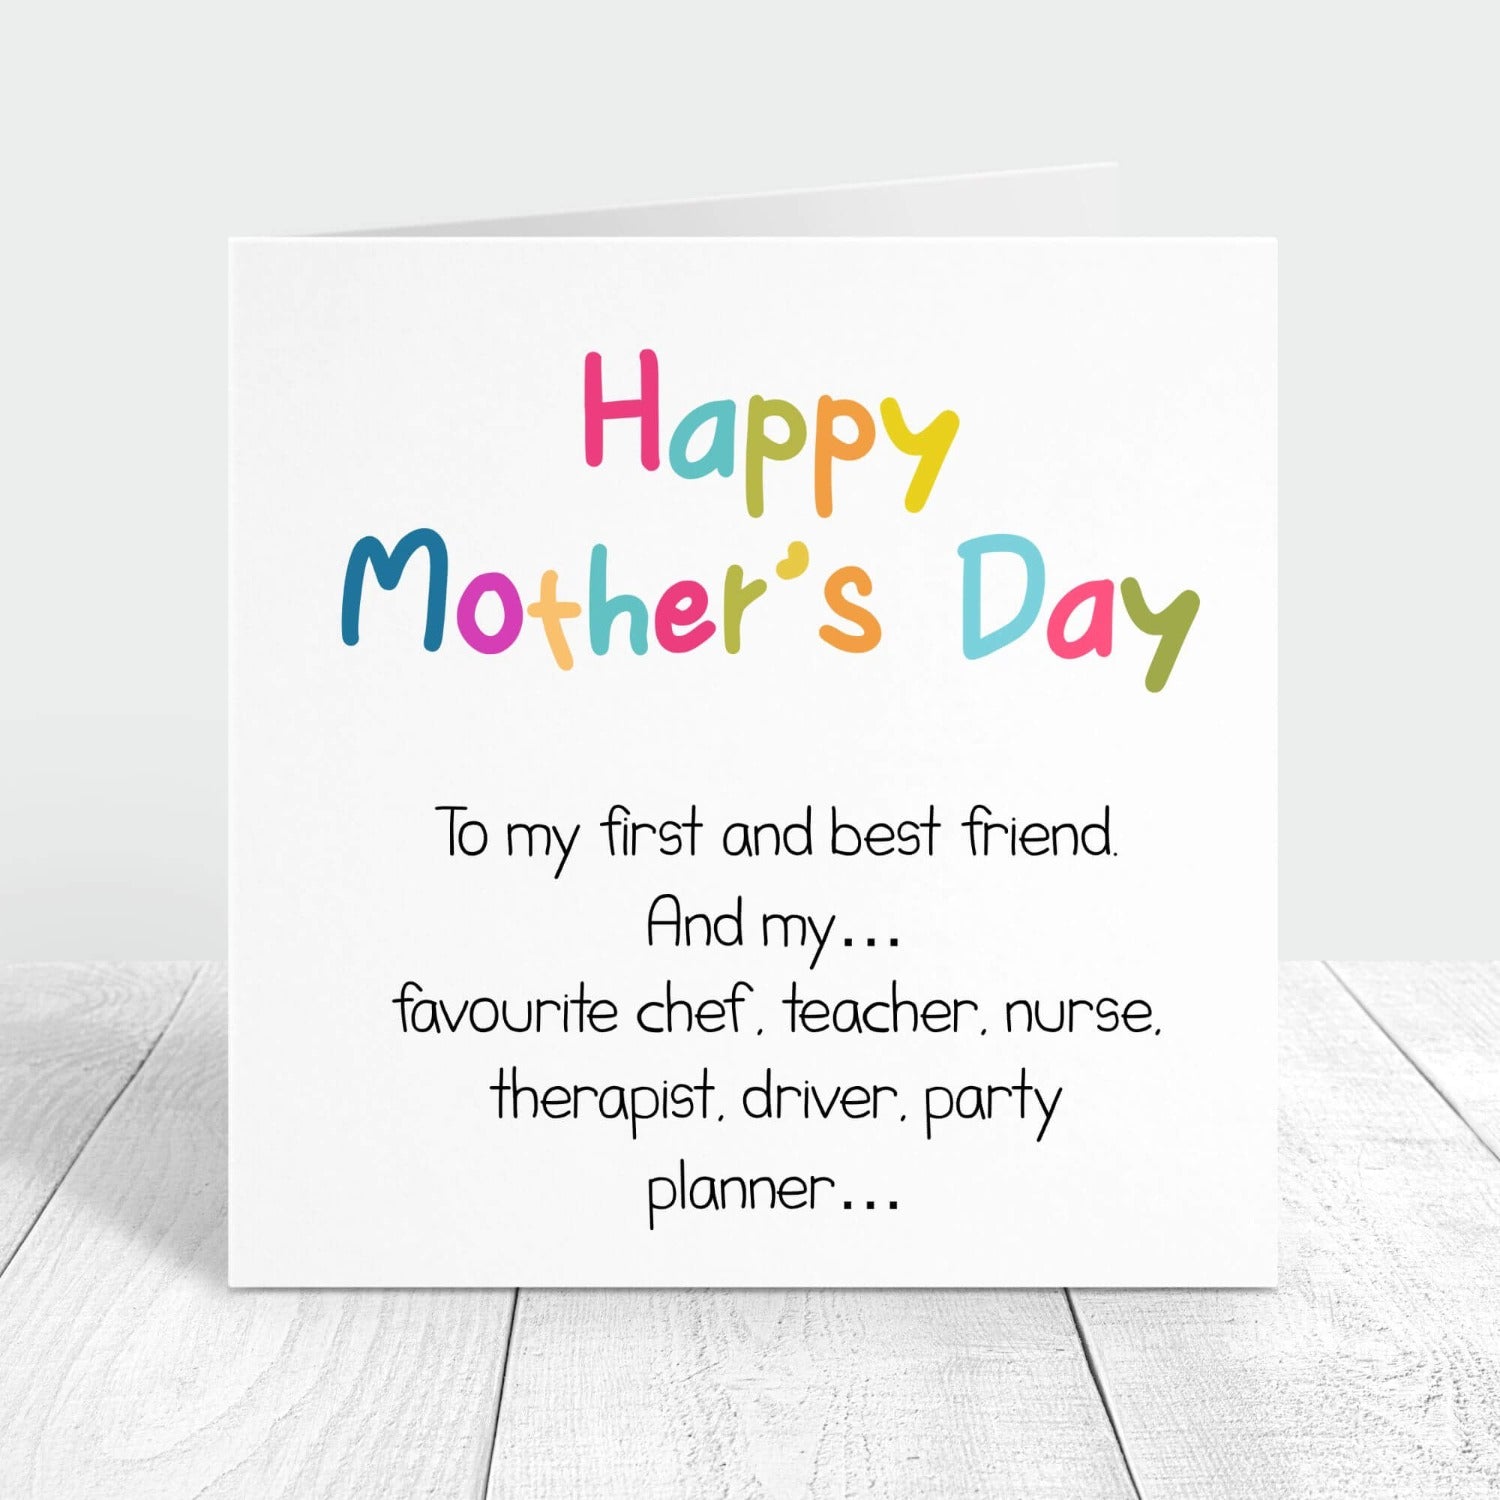 happy mother's day to my mum - funny mum roles card